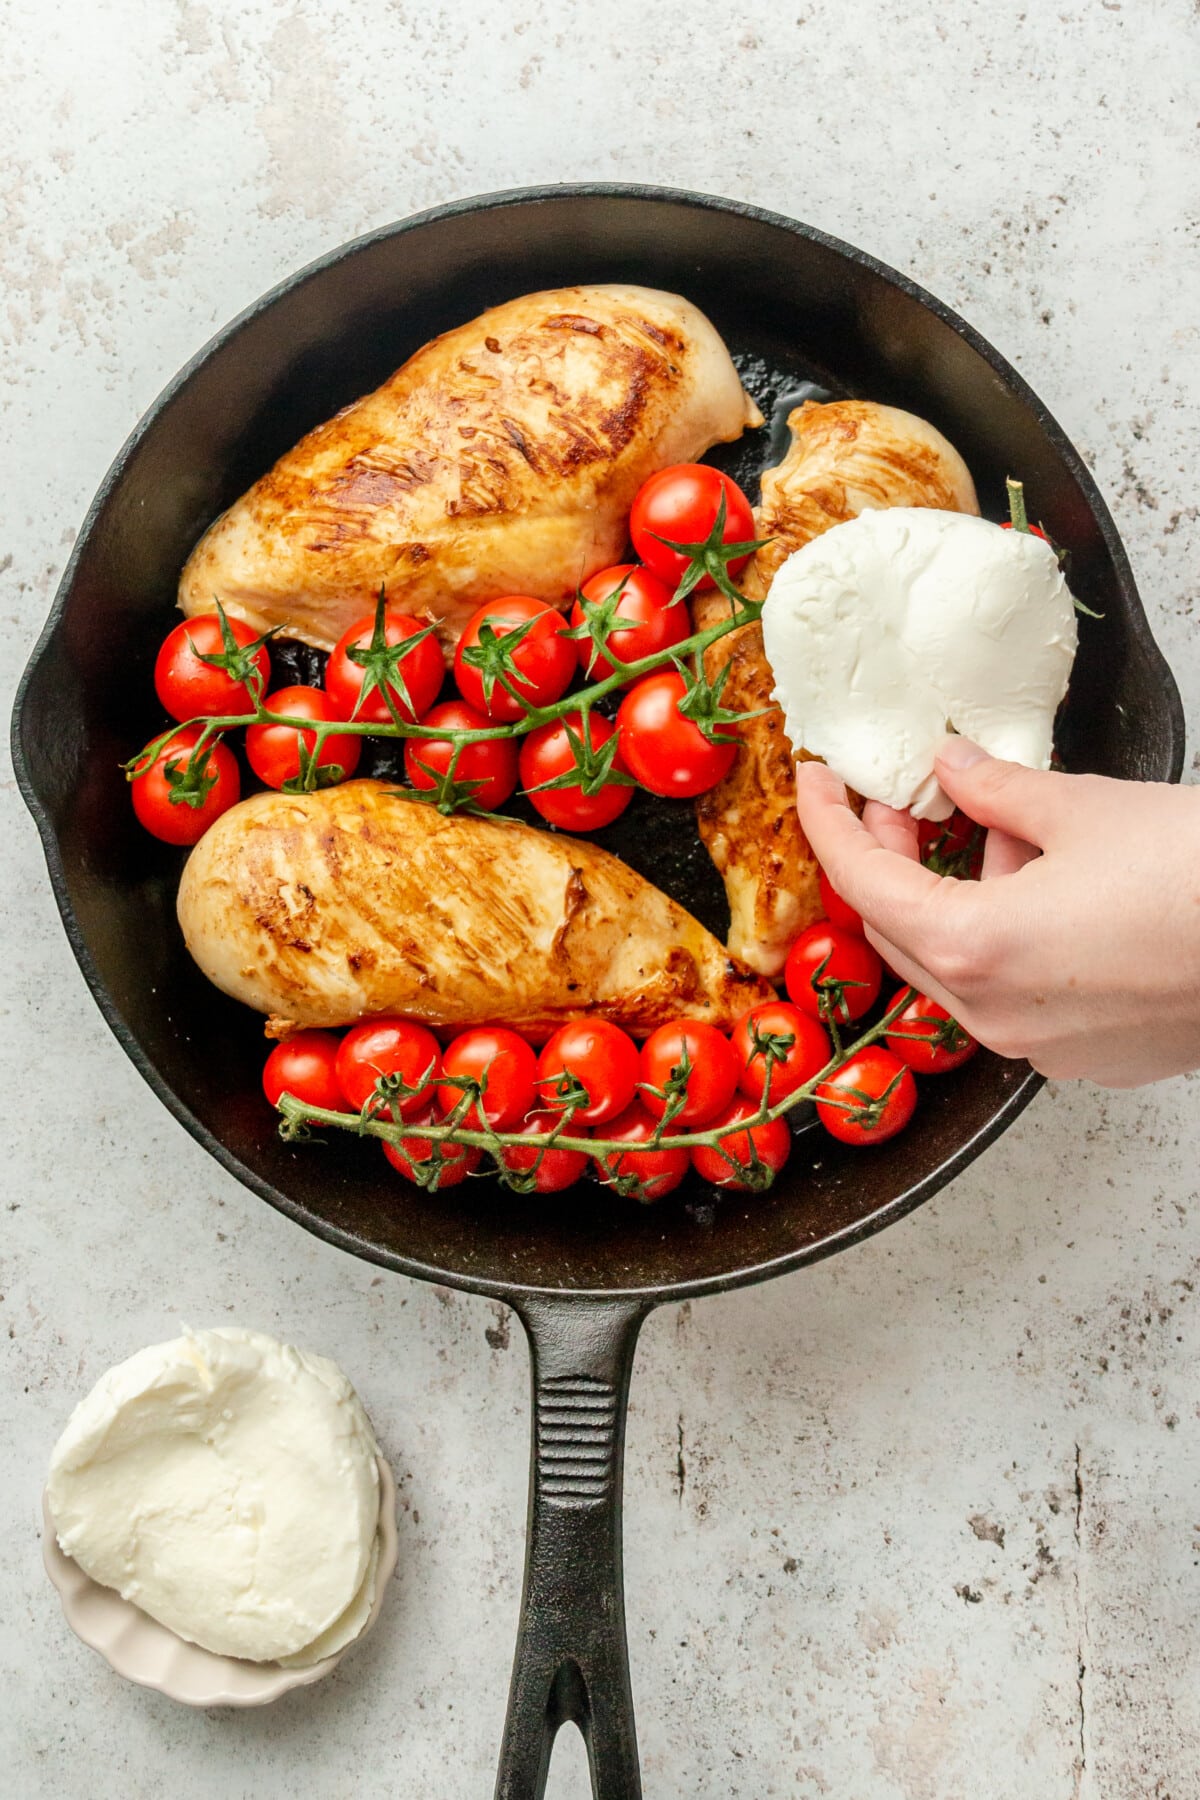 Slices of mozzarella are placed on top of cooked chicken in a cast iron skillet on a light grey surface.